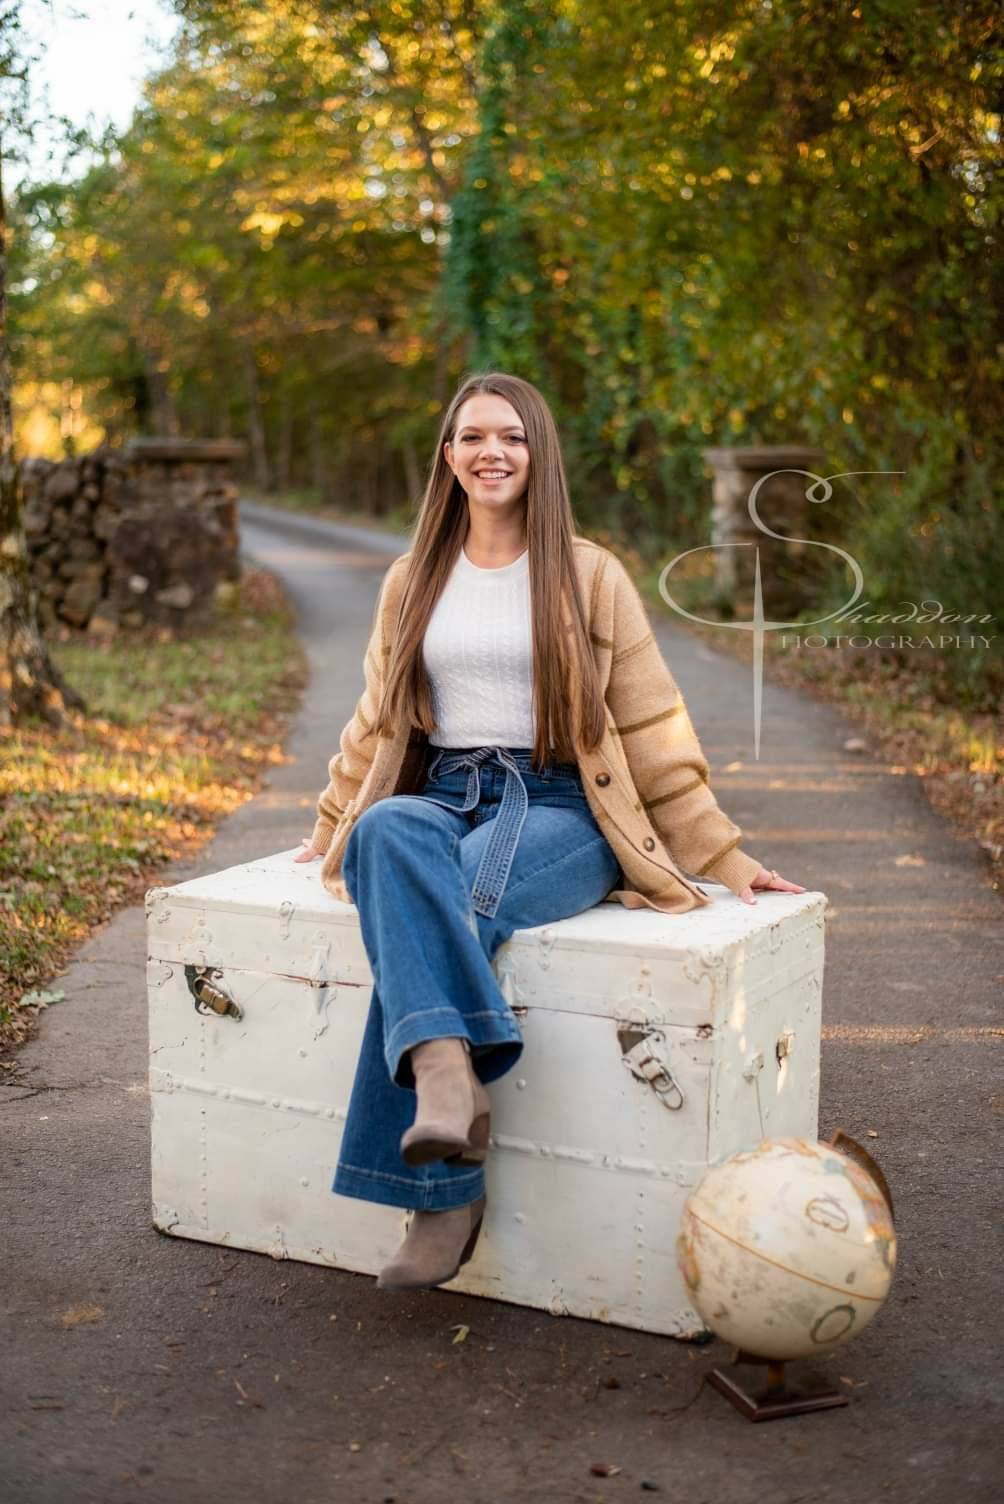 Avery Powell, smiling while sitting on a white, antique trunk. A globe sits on the ground by the trunk.